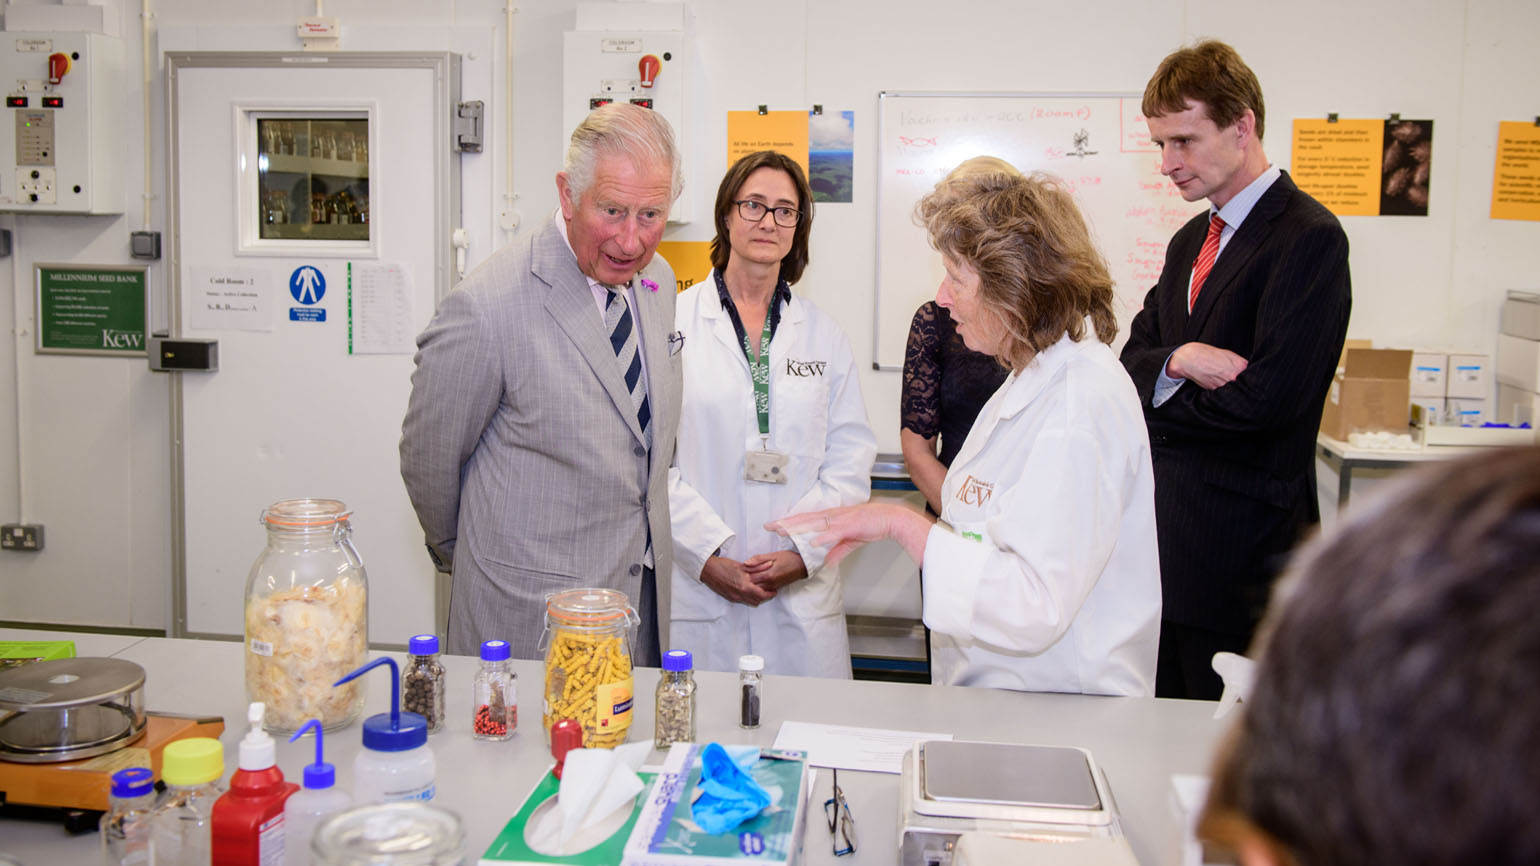 HRH The Prince of Wales visits the Millennium Seed Bank